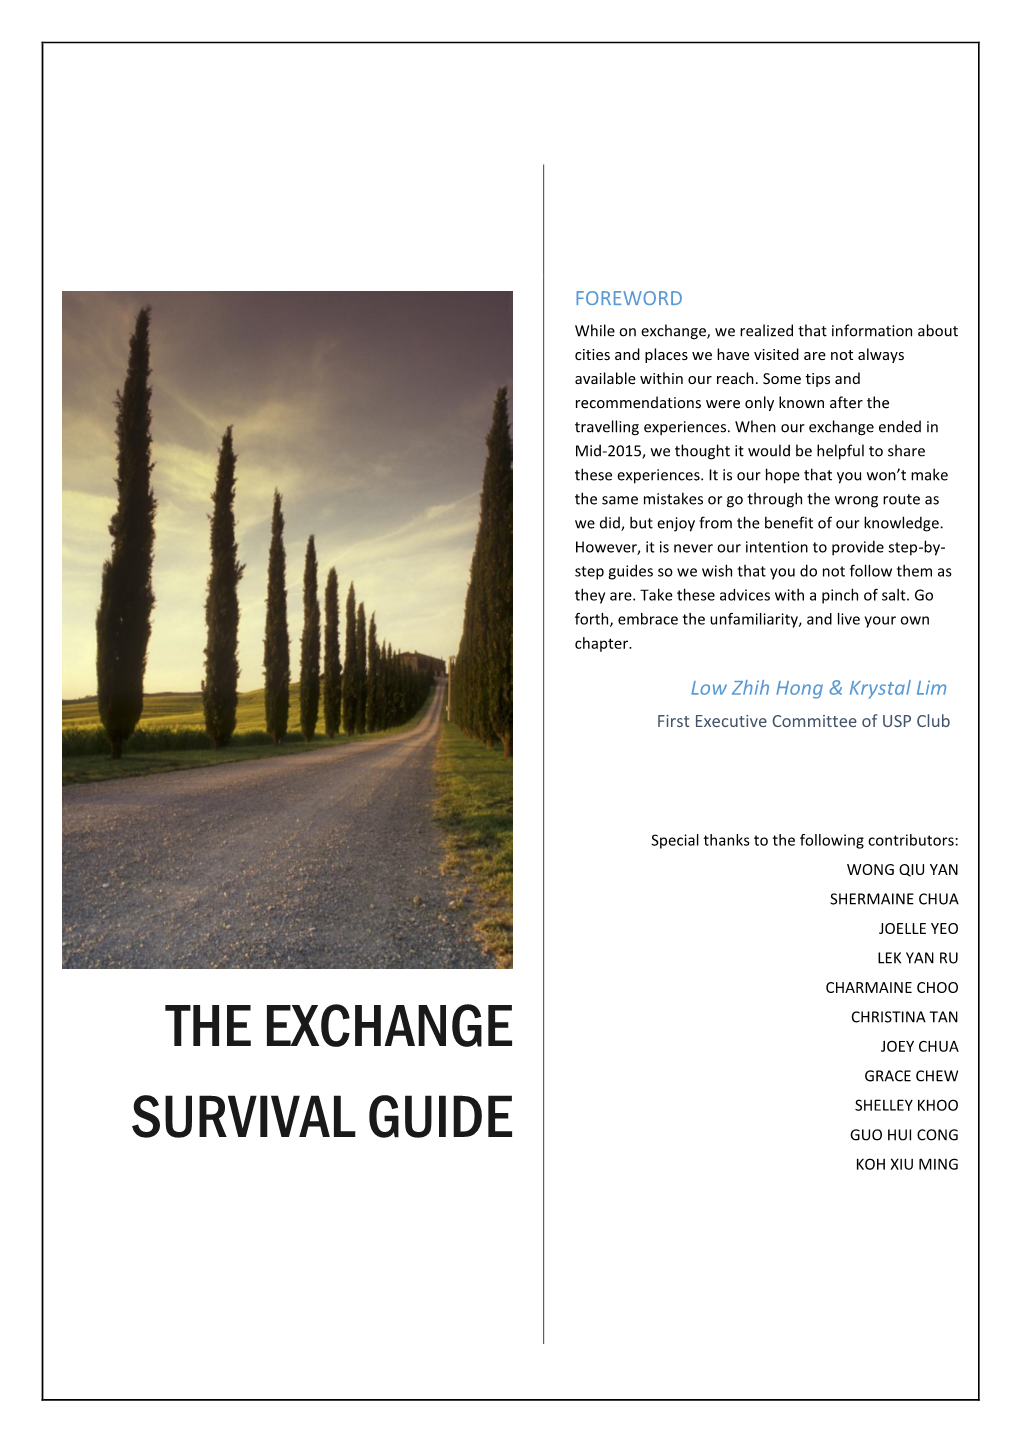 The Exchange Survival Guide